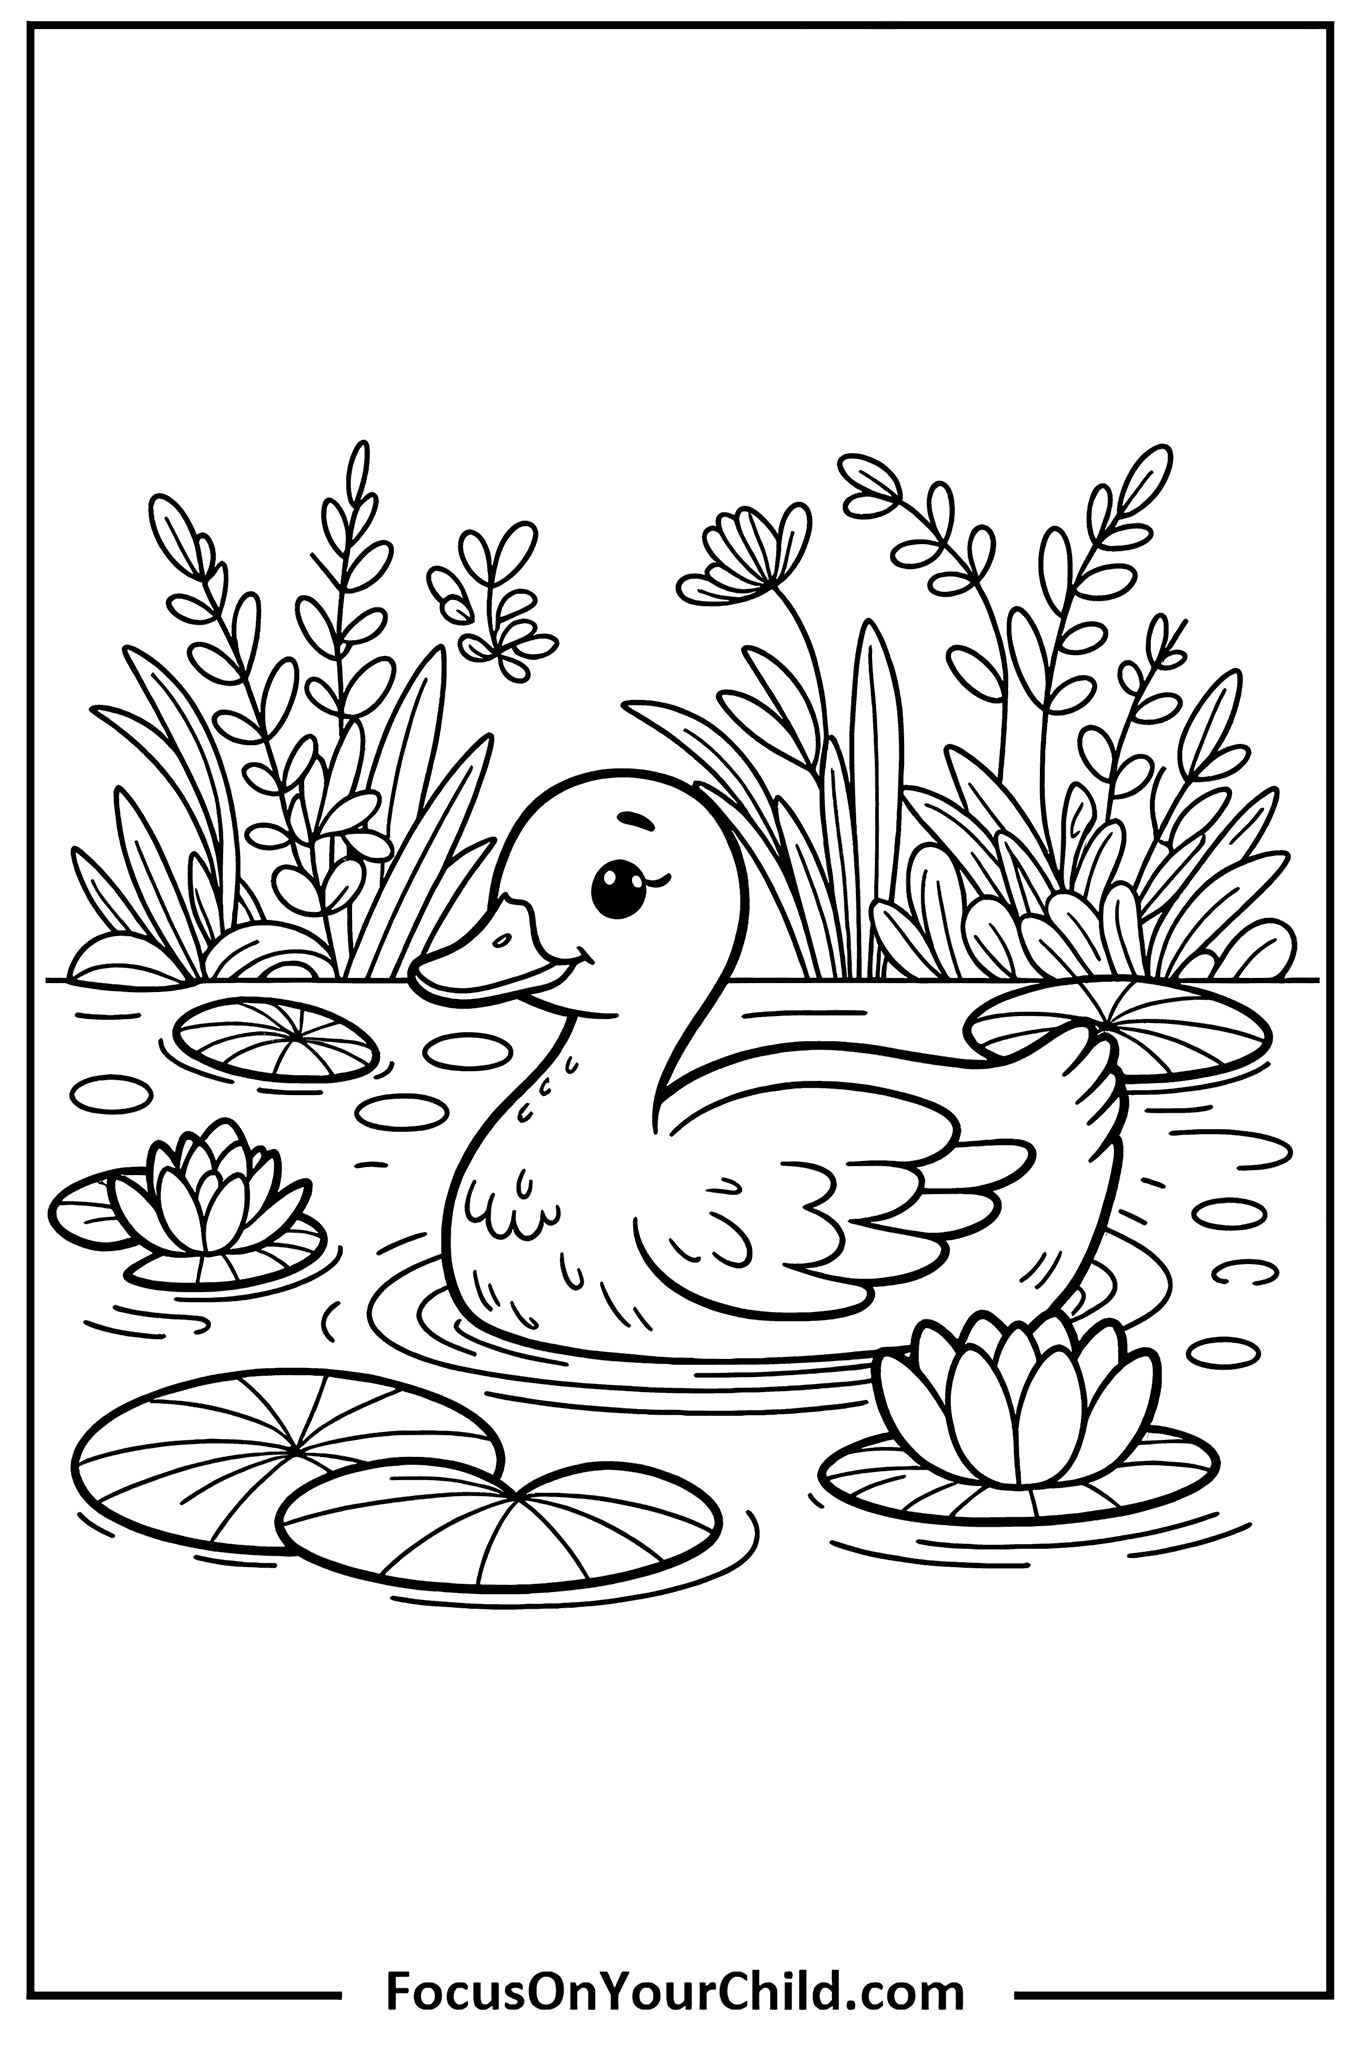 Charming duck coloring page for kids to enjoy on FocusOnYourChild.com.